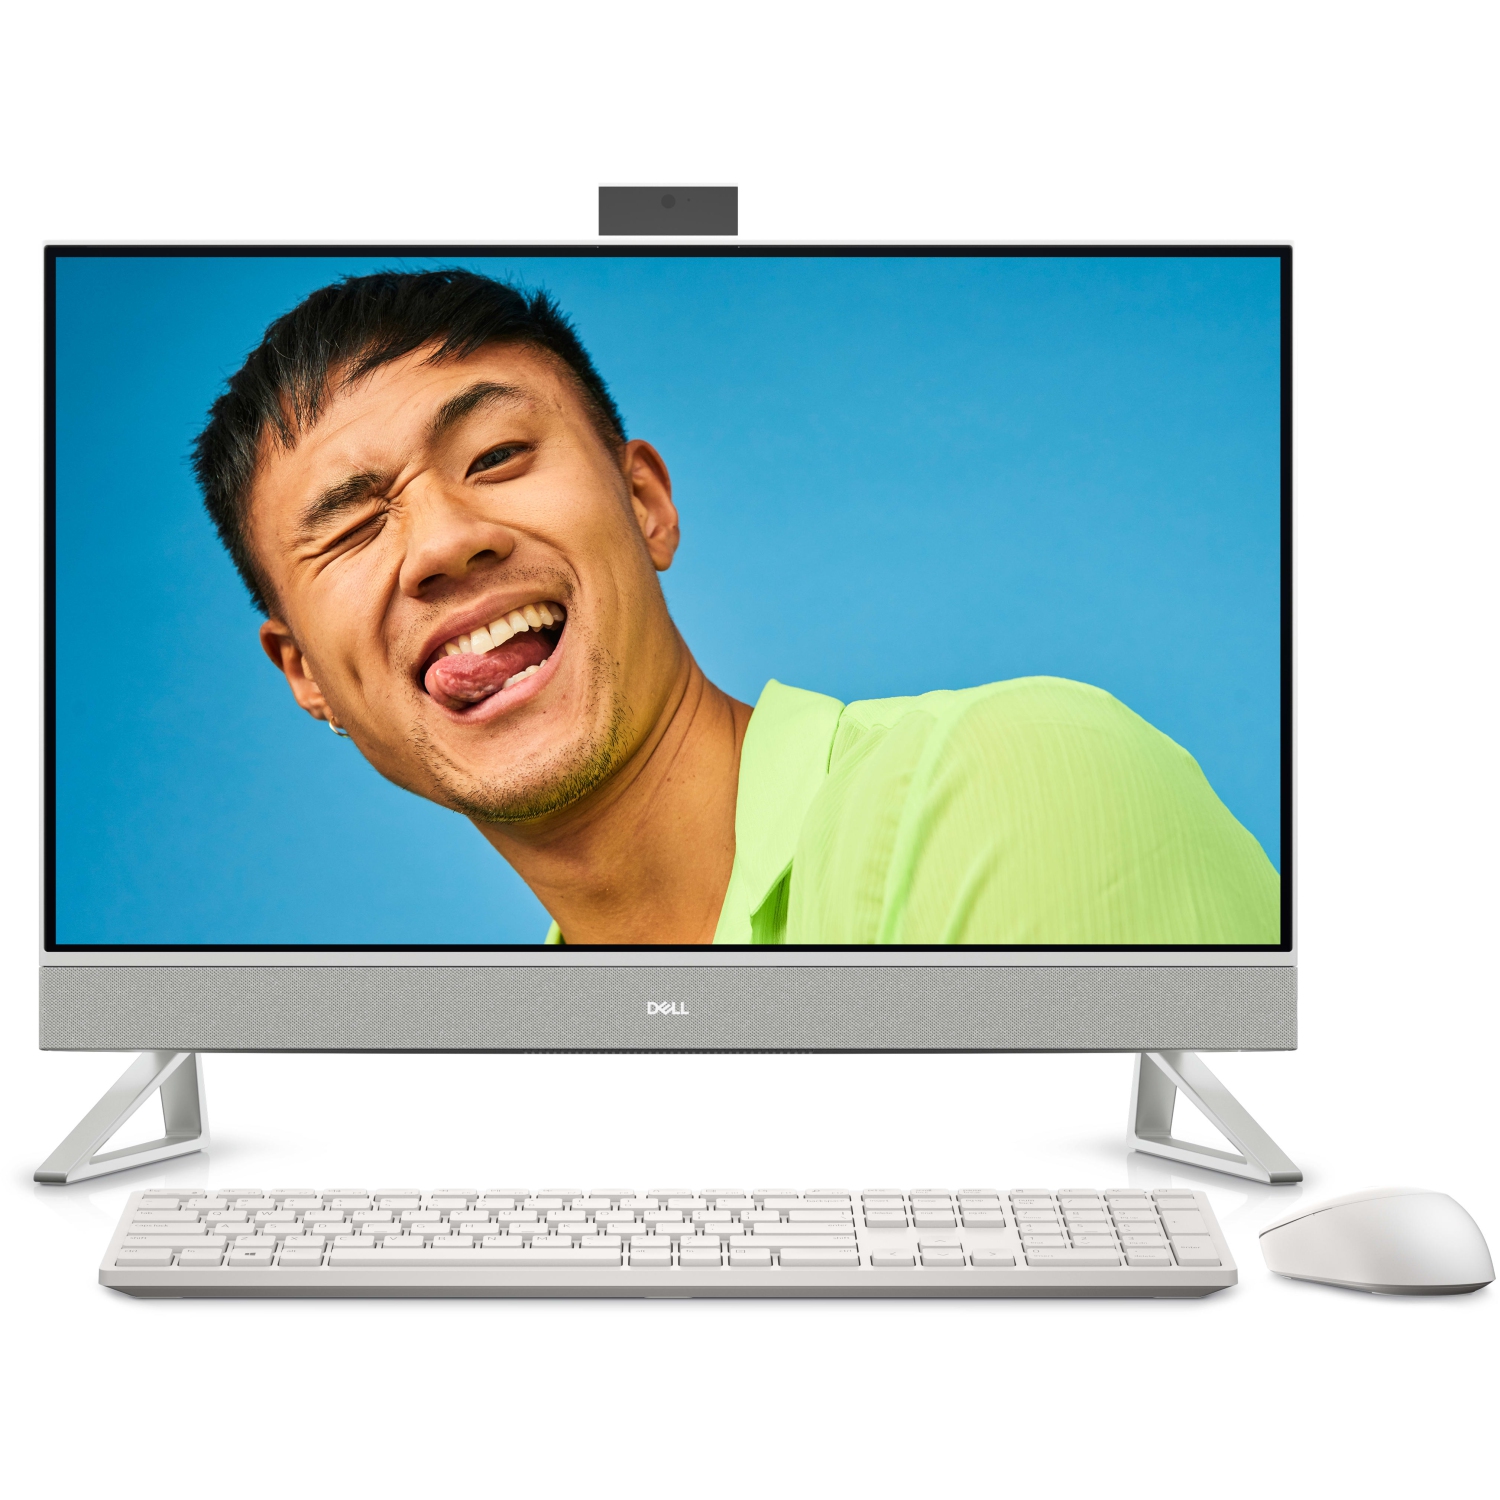 Refurbished (Excellent) – Dell Inspiron 7710 AIO (2022) | 27" FHD | Core i7 - 1TB HDD + 512GB SSD - 16GB RAM - GeForce MX550 | 10 Cores @ 4.7 GHz - 12th Gen CPU